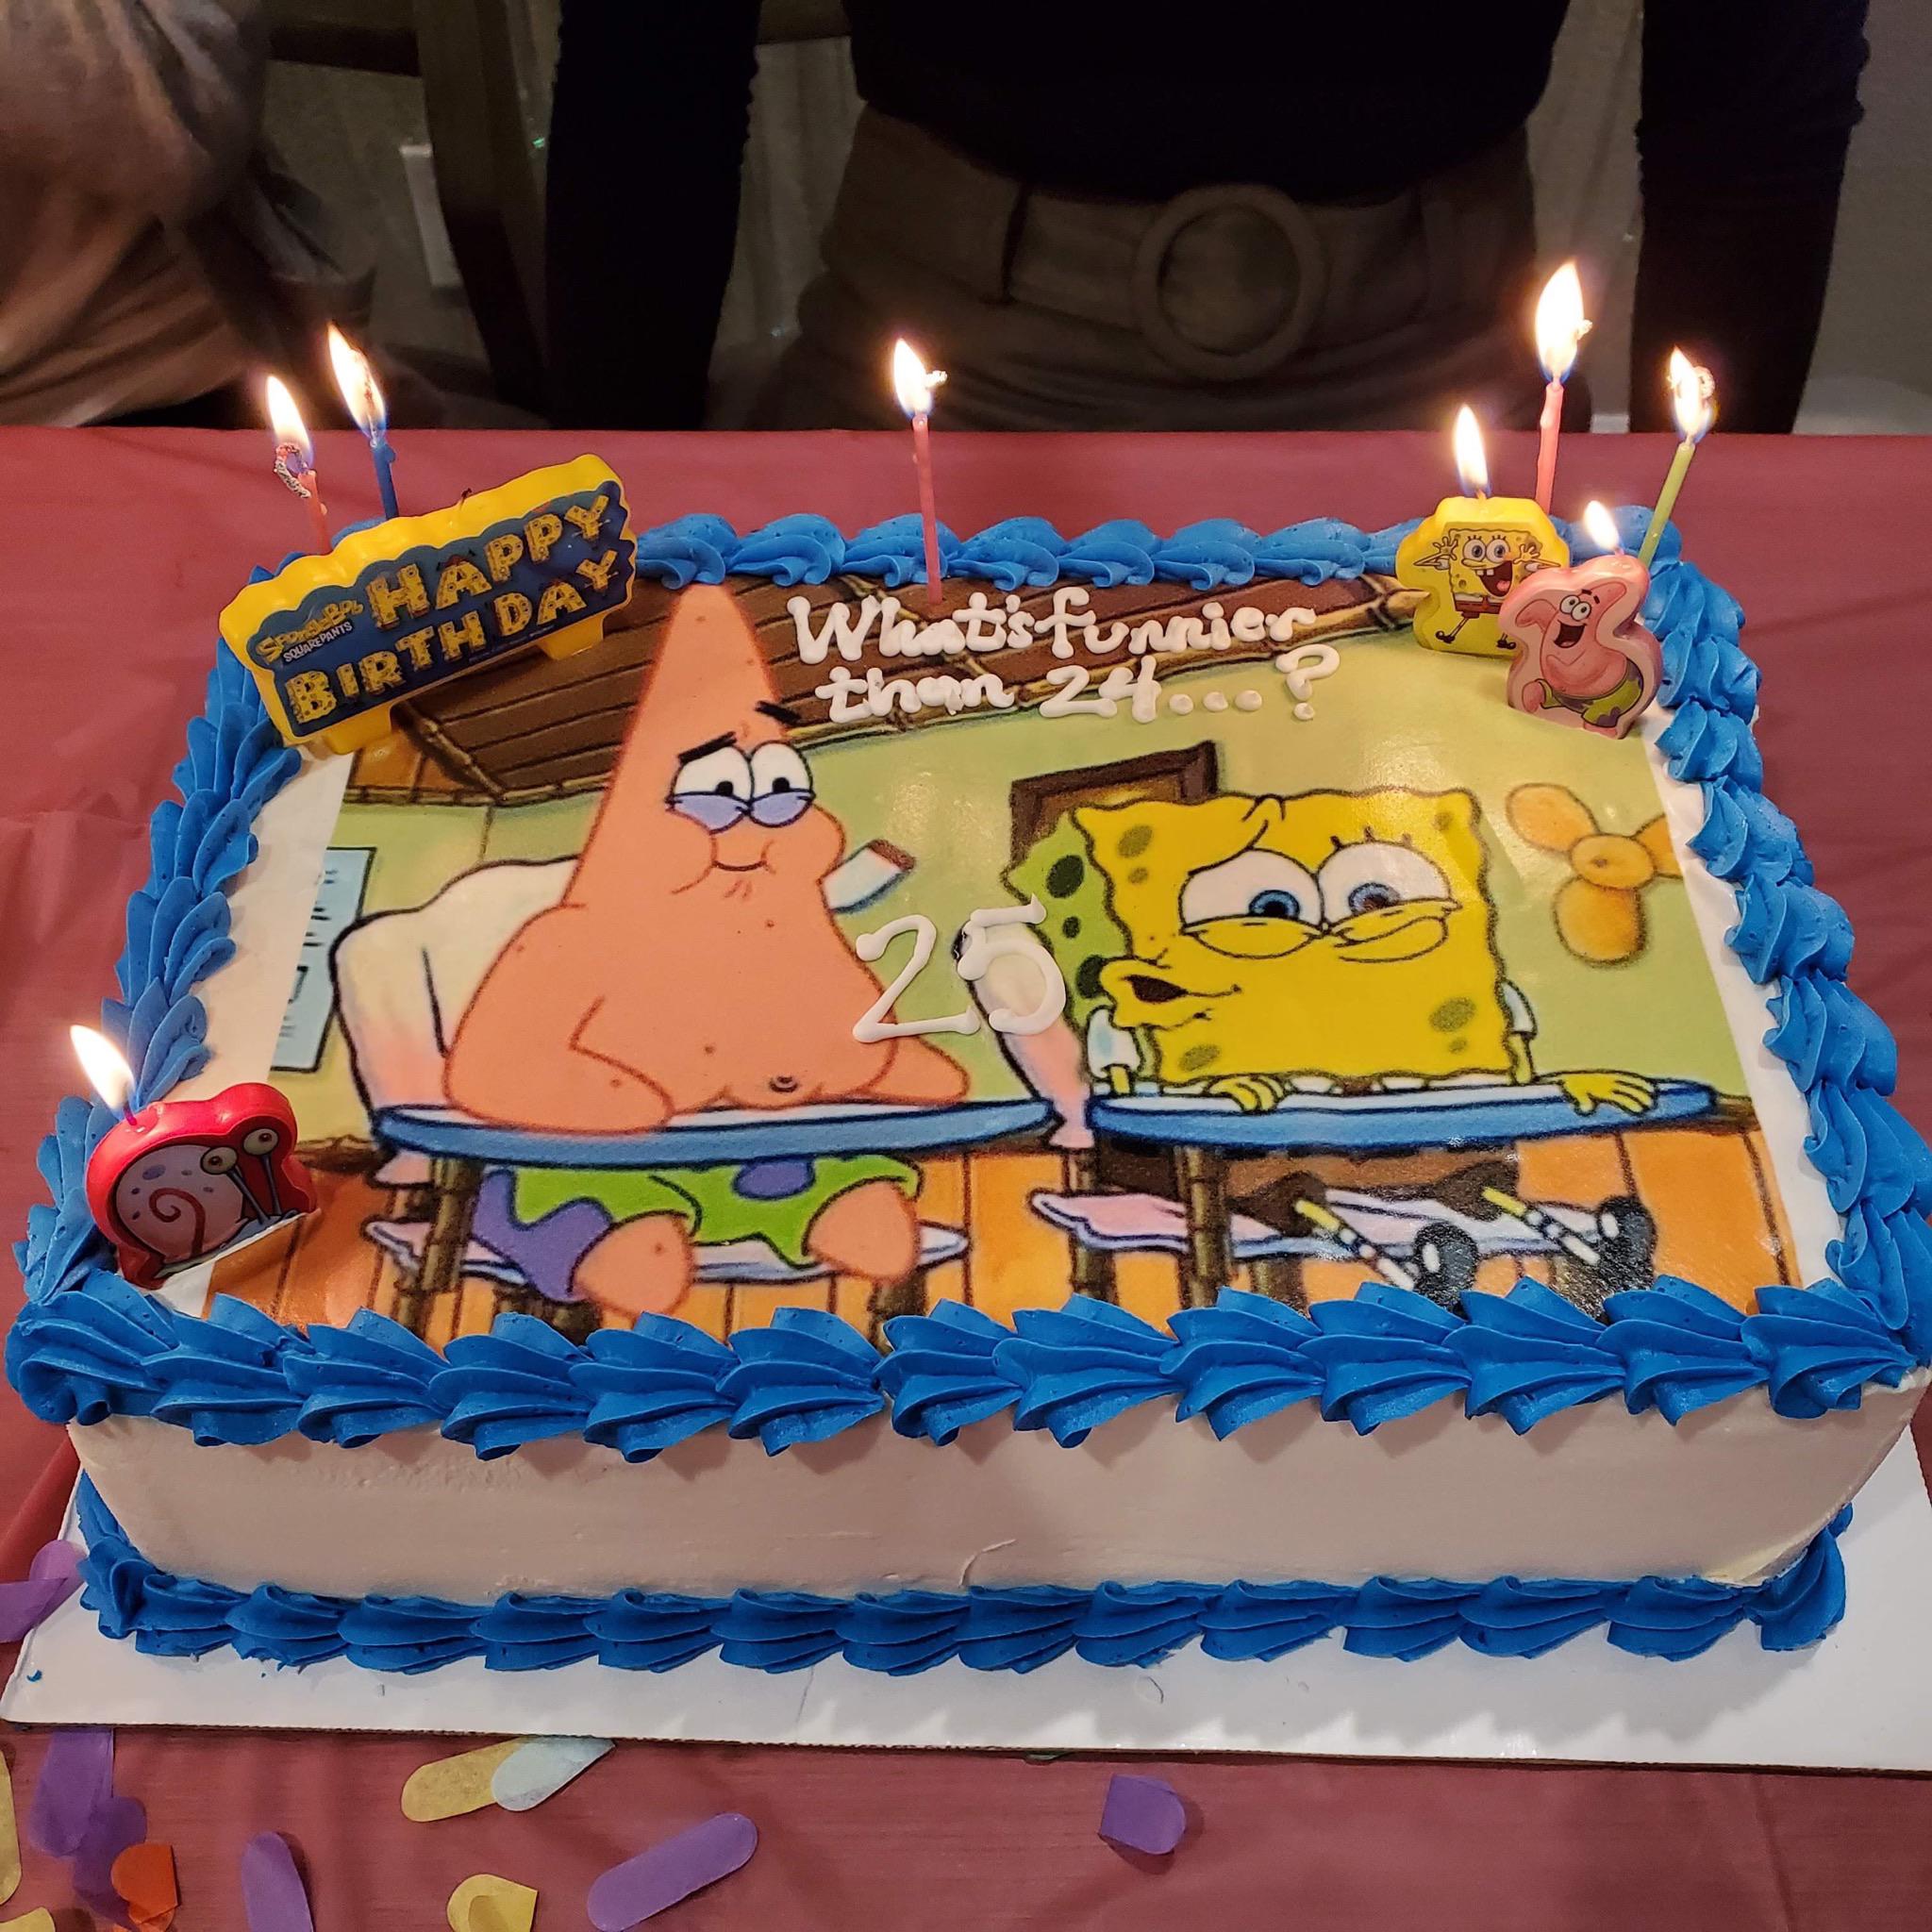 25th birthday cake, posted by user linlins13 on. 